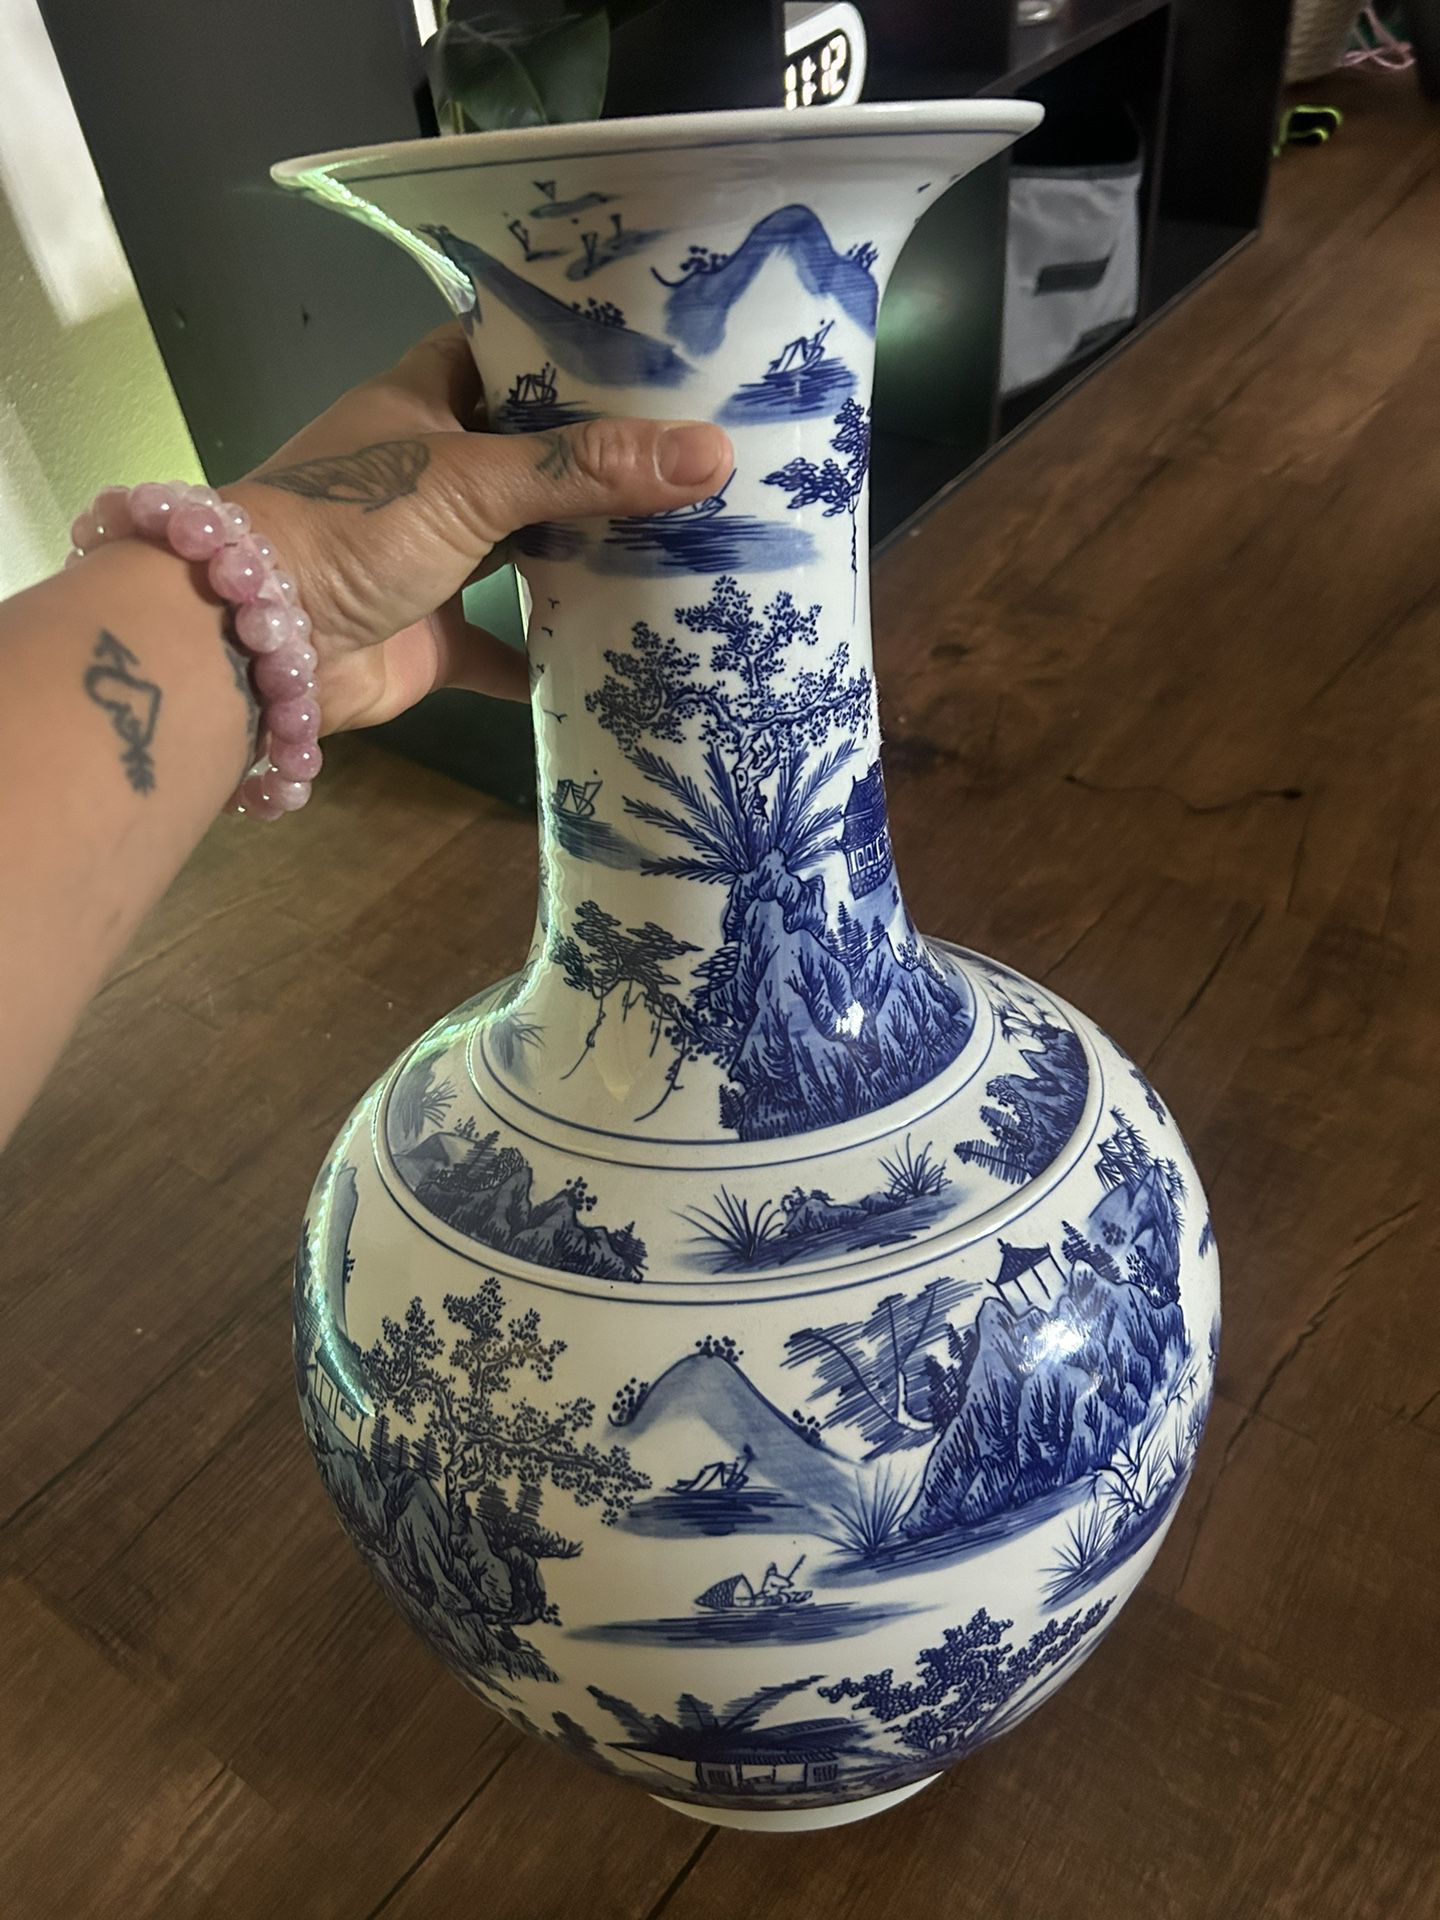 Blue and White Porcelain Imperial Dragon Chinese Antique Vase